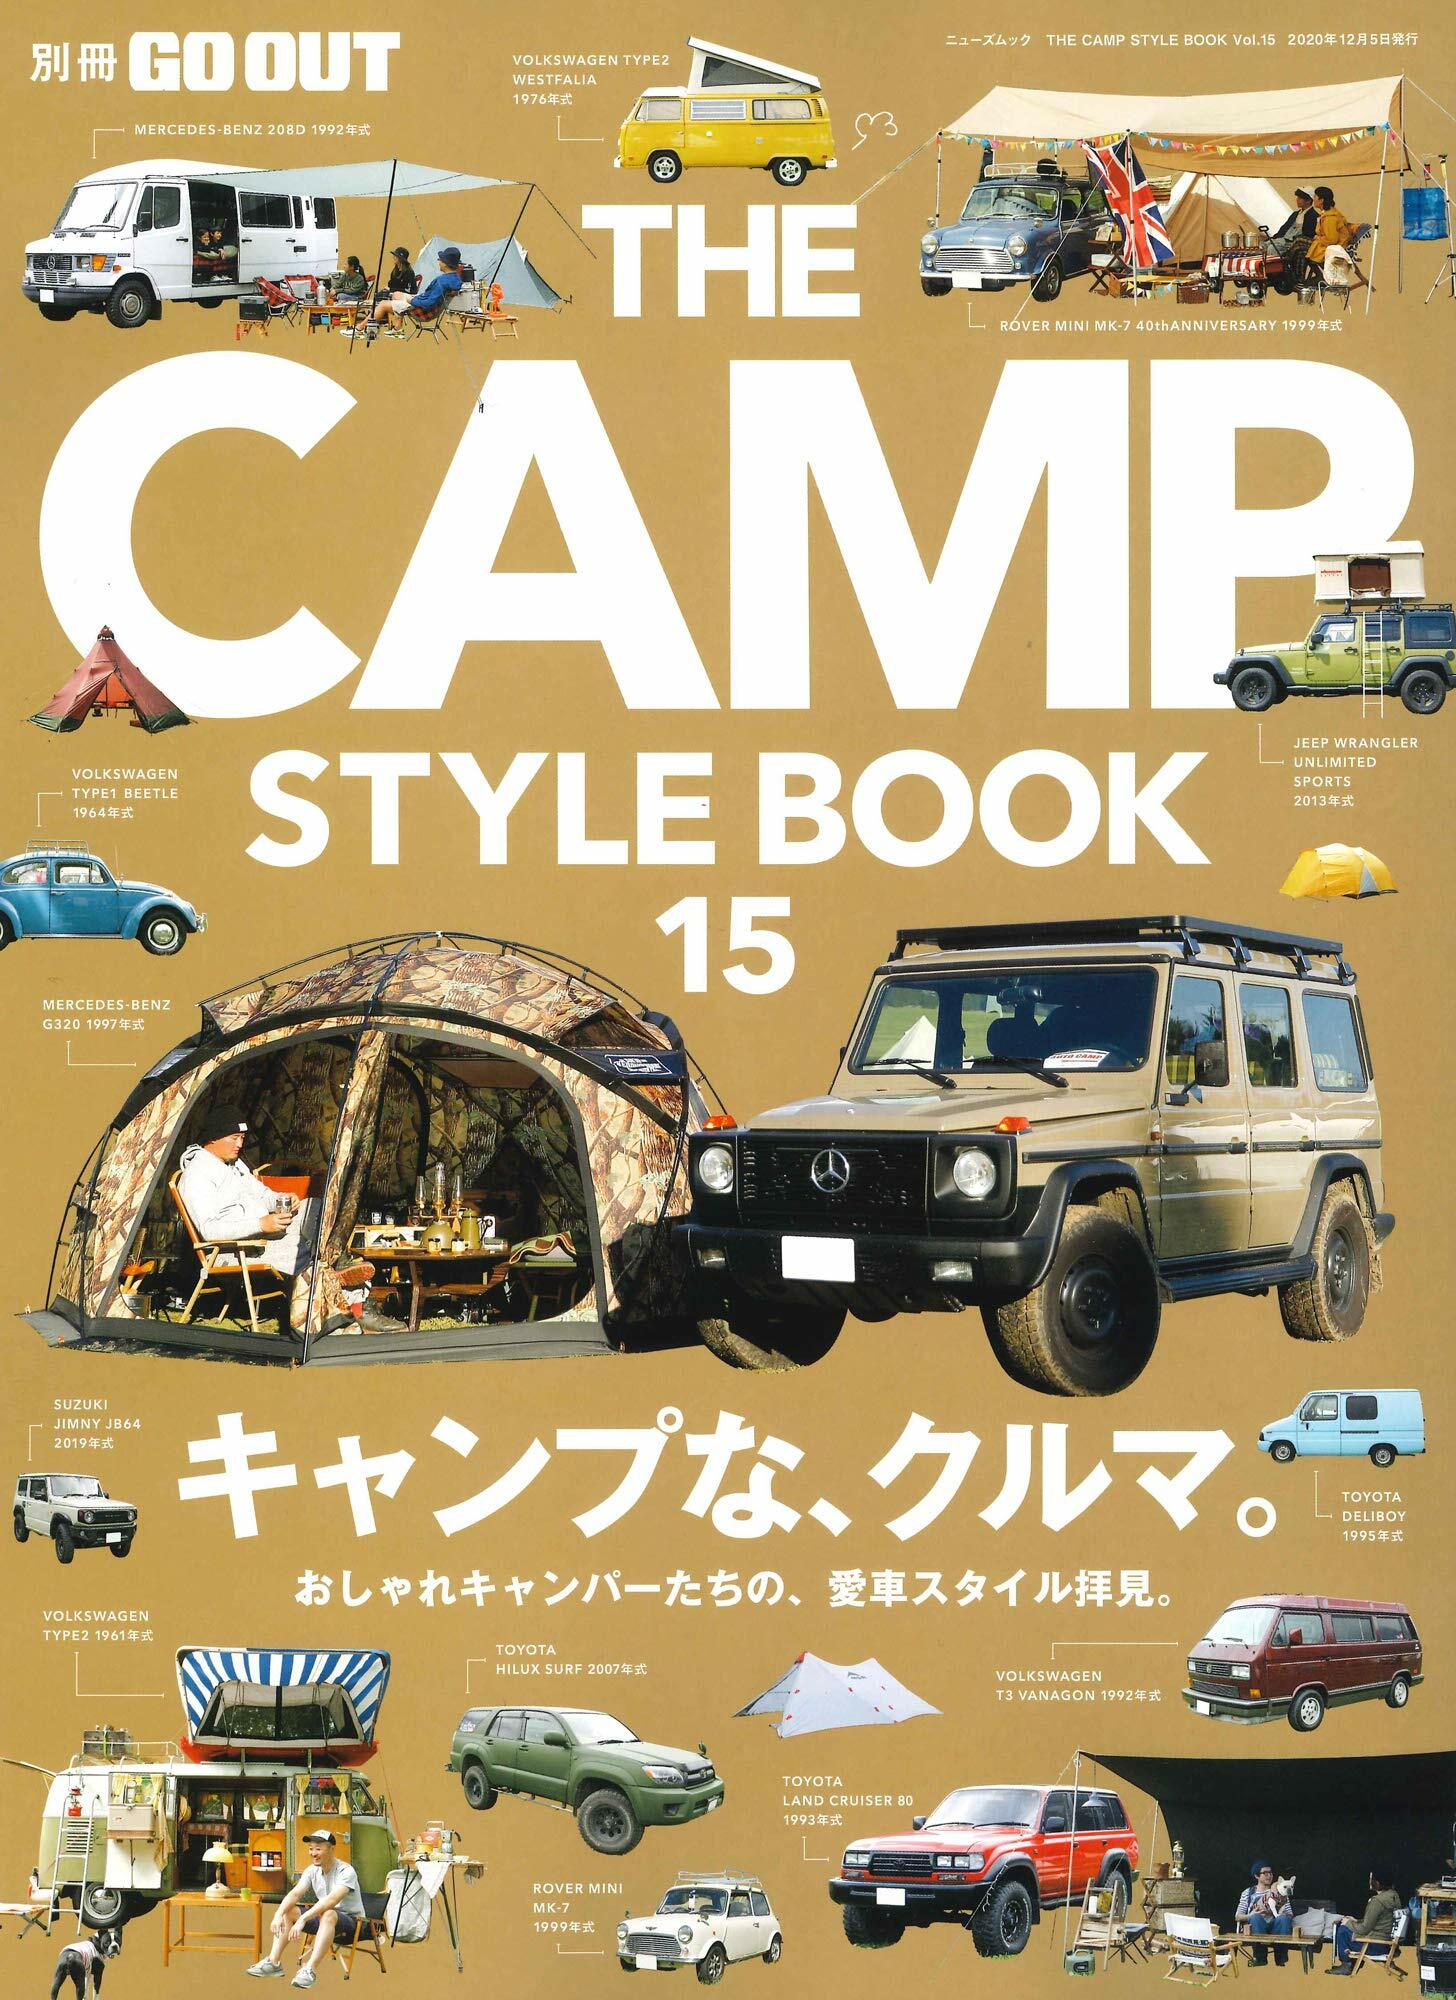 THE CAMP STYLE BOOK Vol.15 (別冊GO OUT)